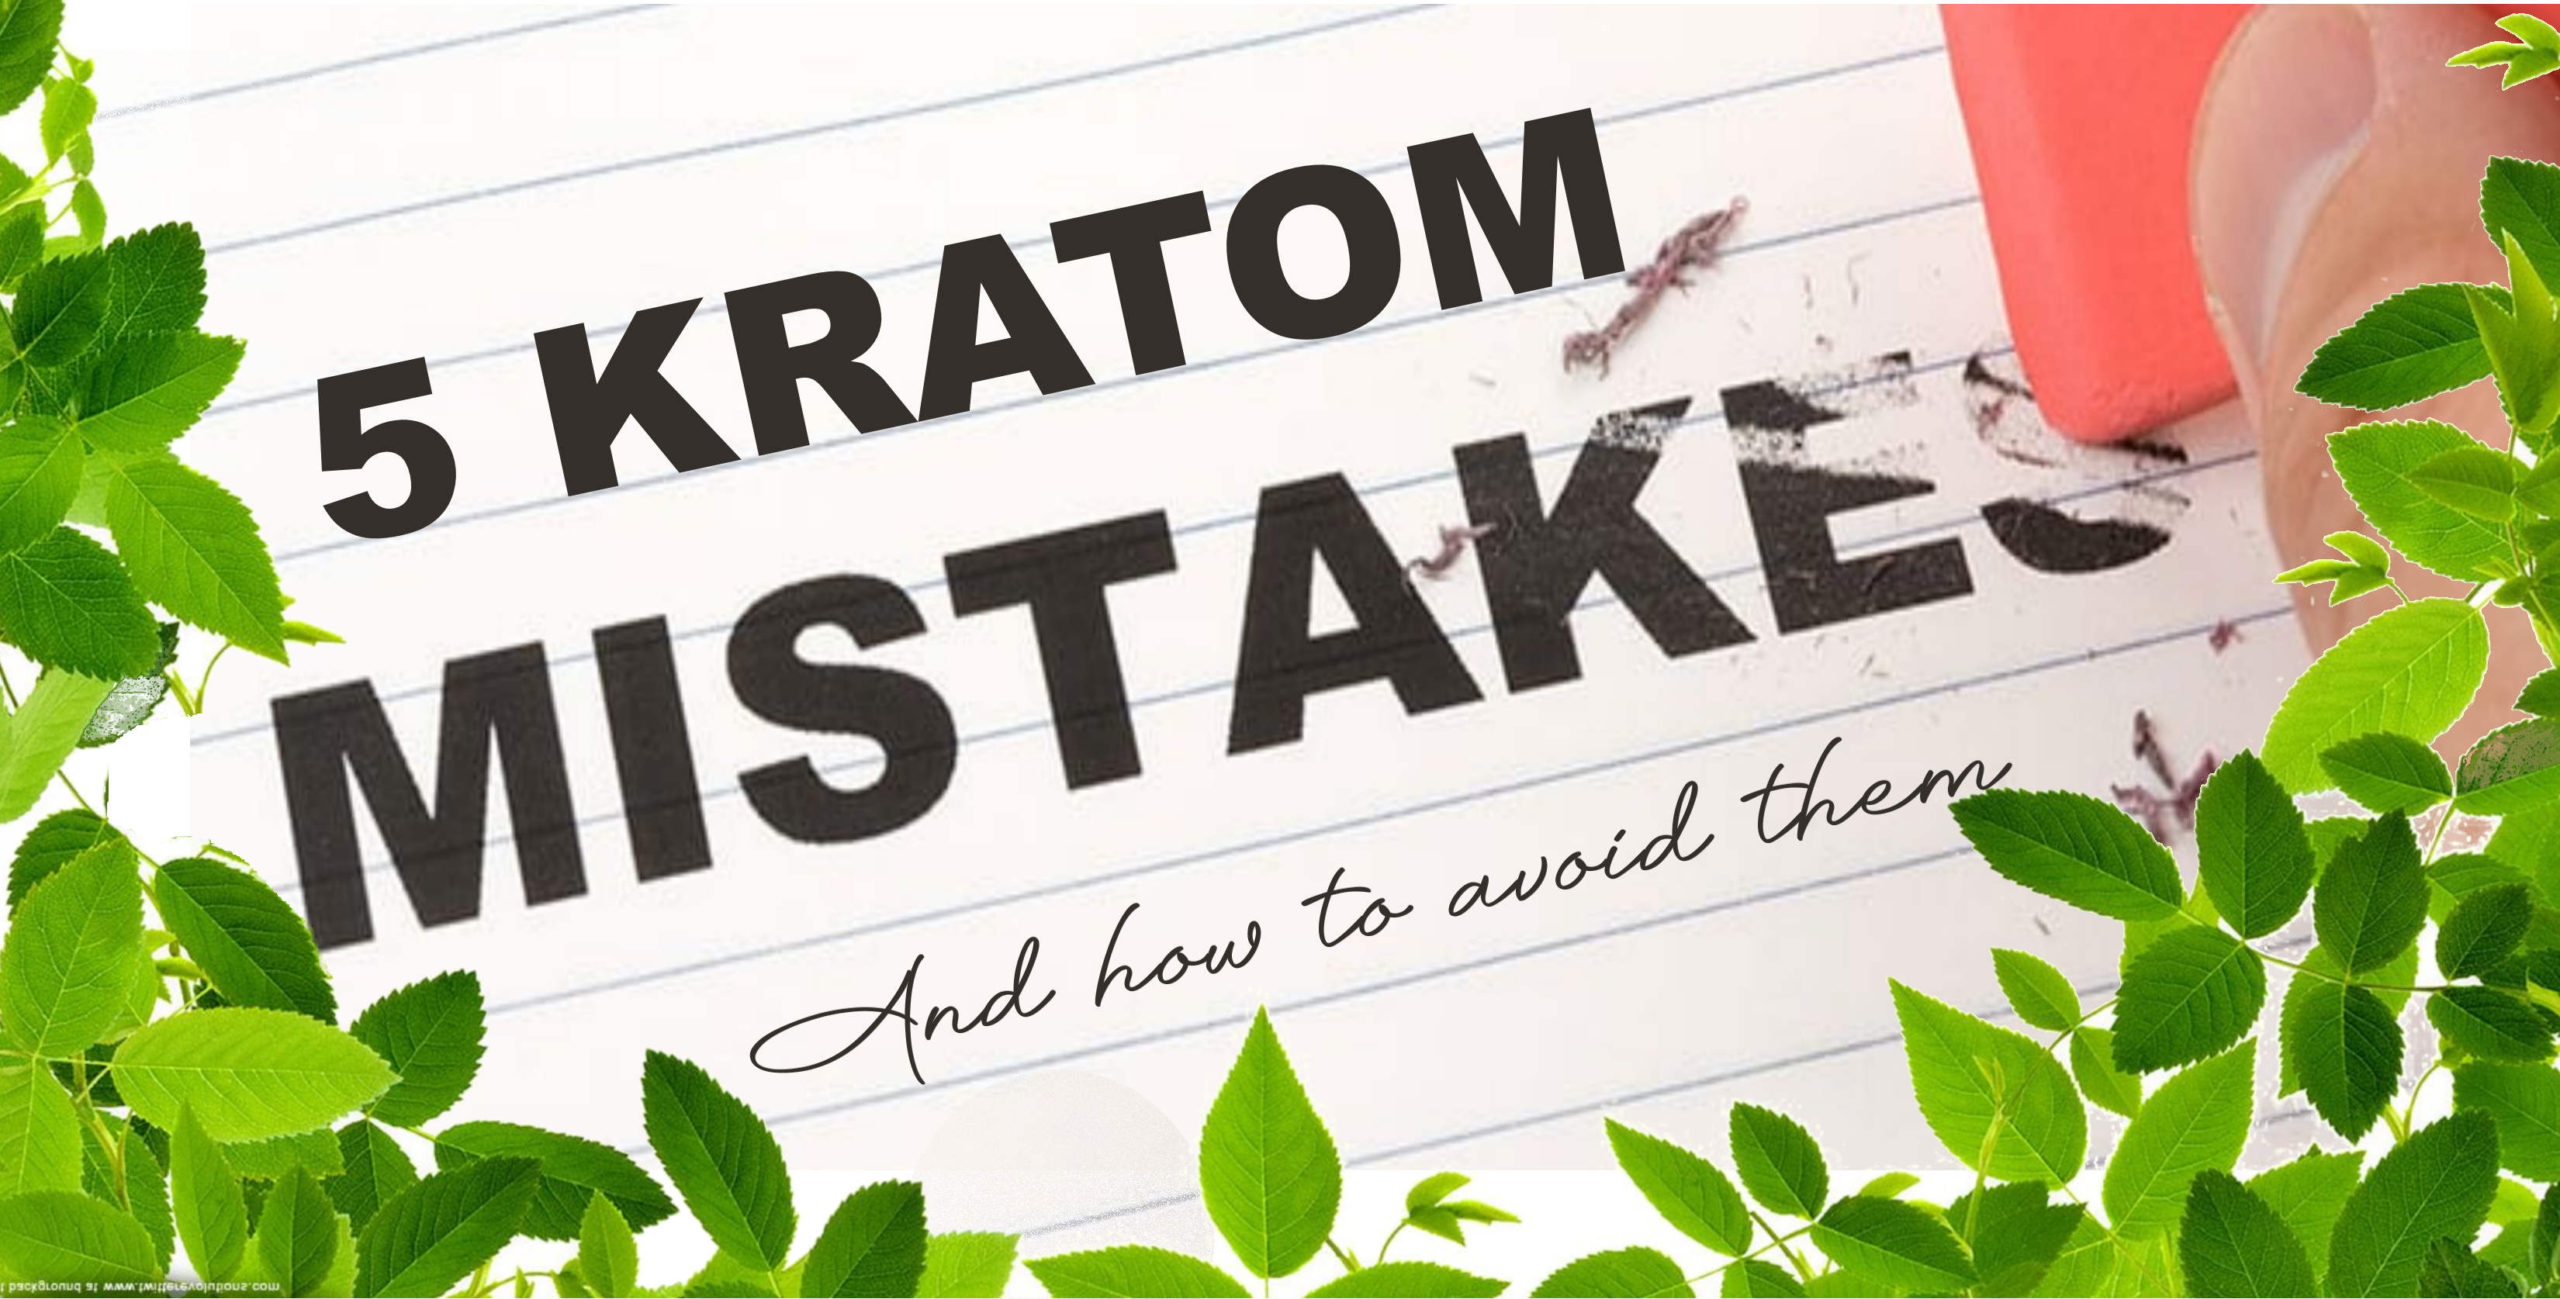 You are currently viewing 5 Kratom Mistakes and How to Avoid Them